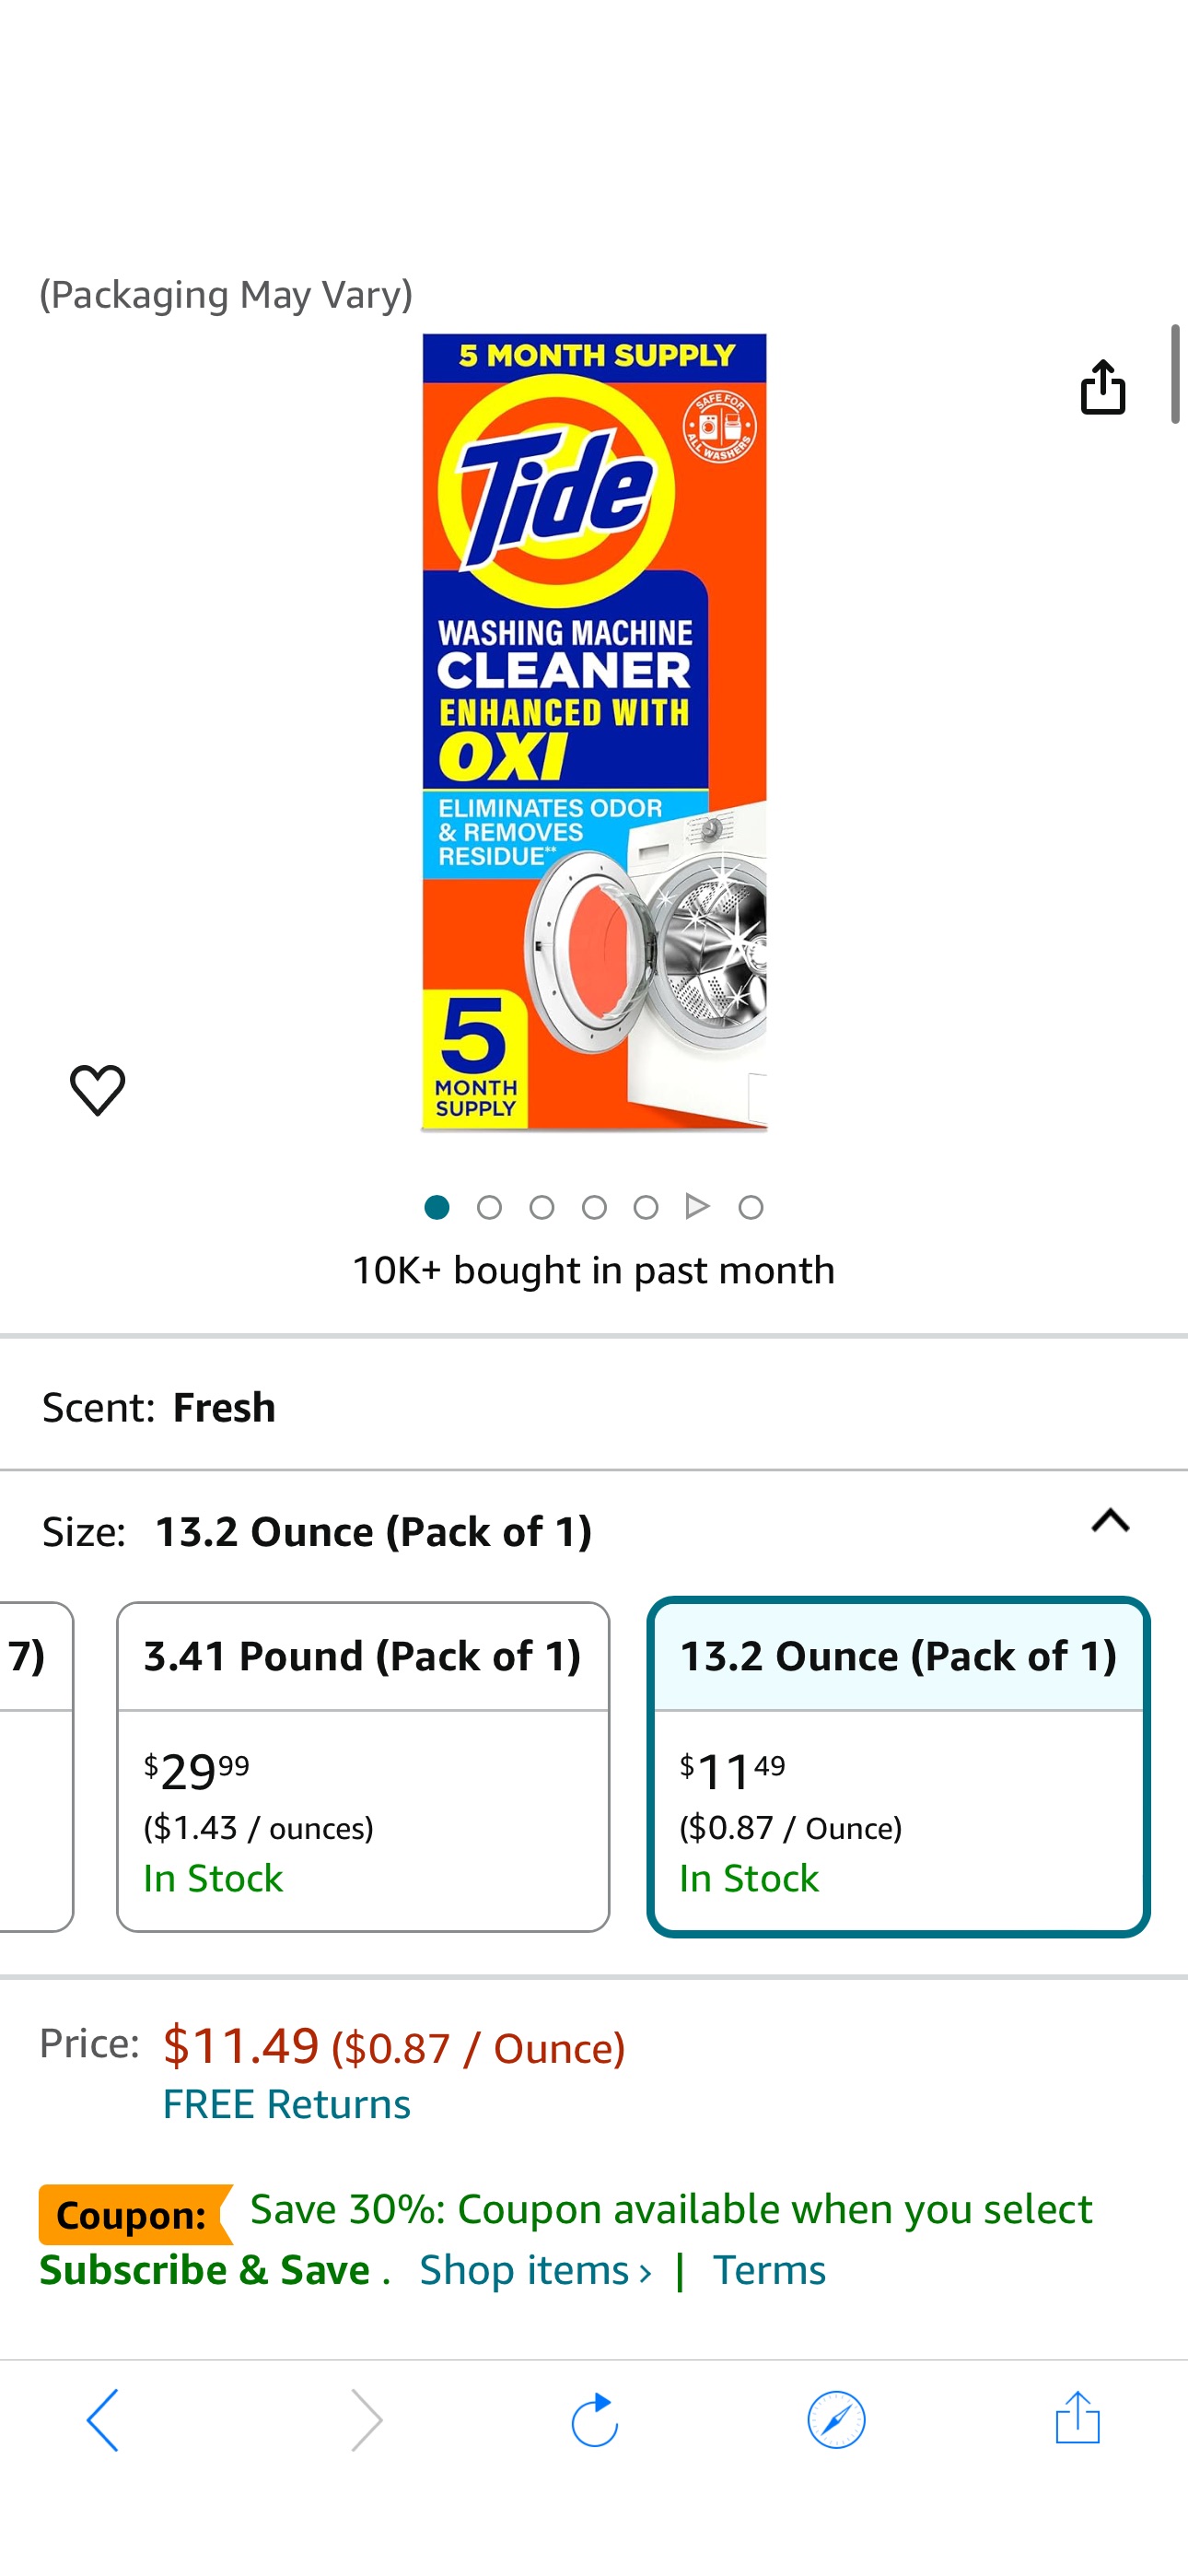 Amazon.com: Washing Machine Cleaner by Tide, Washer Machine Cleaner with Oxi for Front and Top Loader Washer Machines, Deep Cleaning Residue & Odor Eliminator, 5 Month Supply (Packaging May Vary) : He